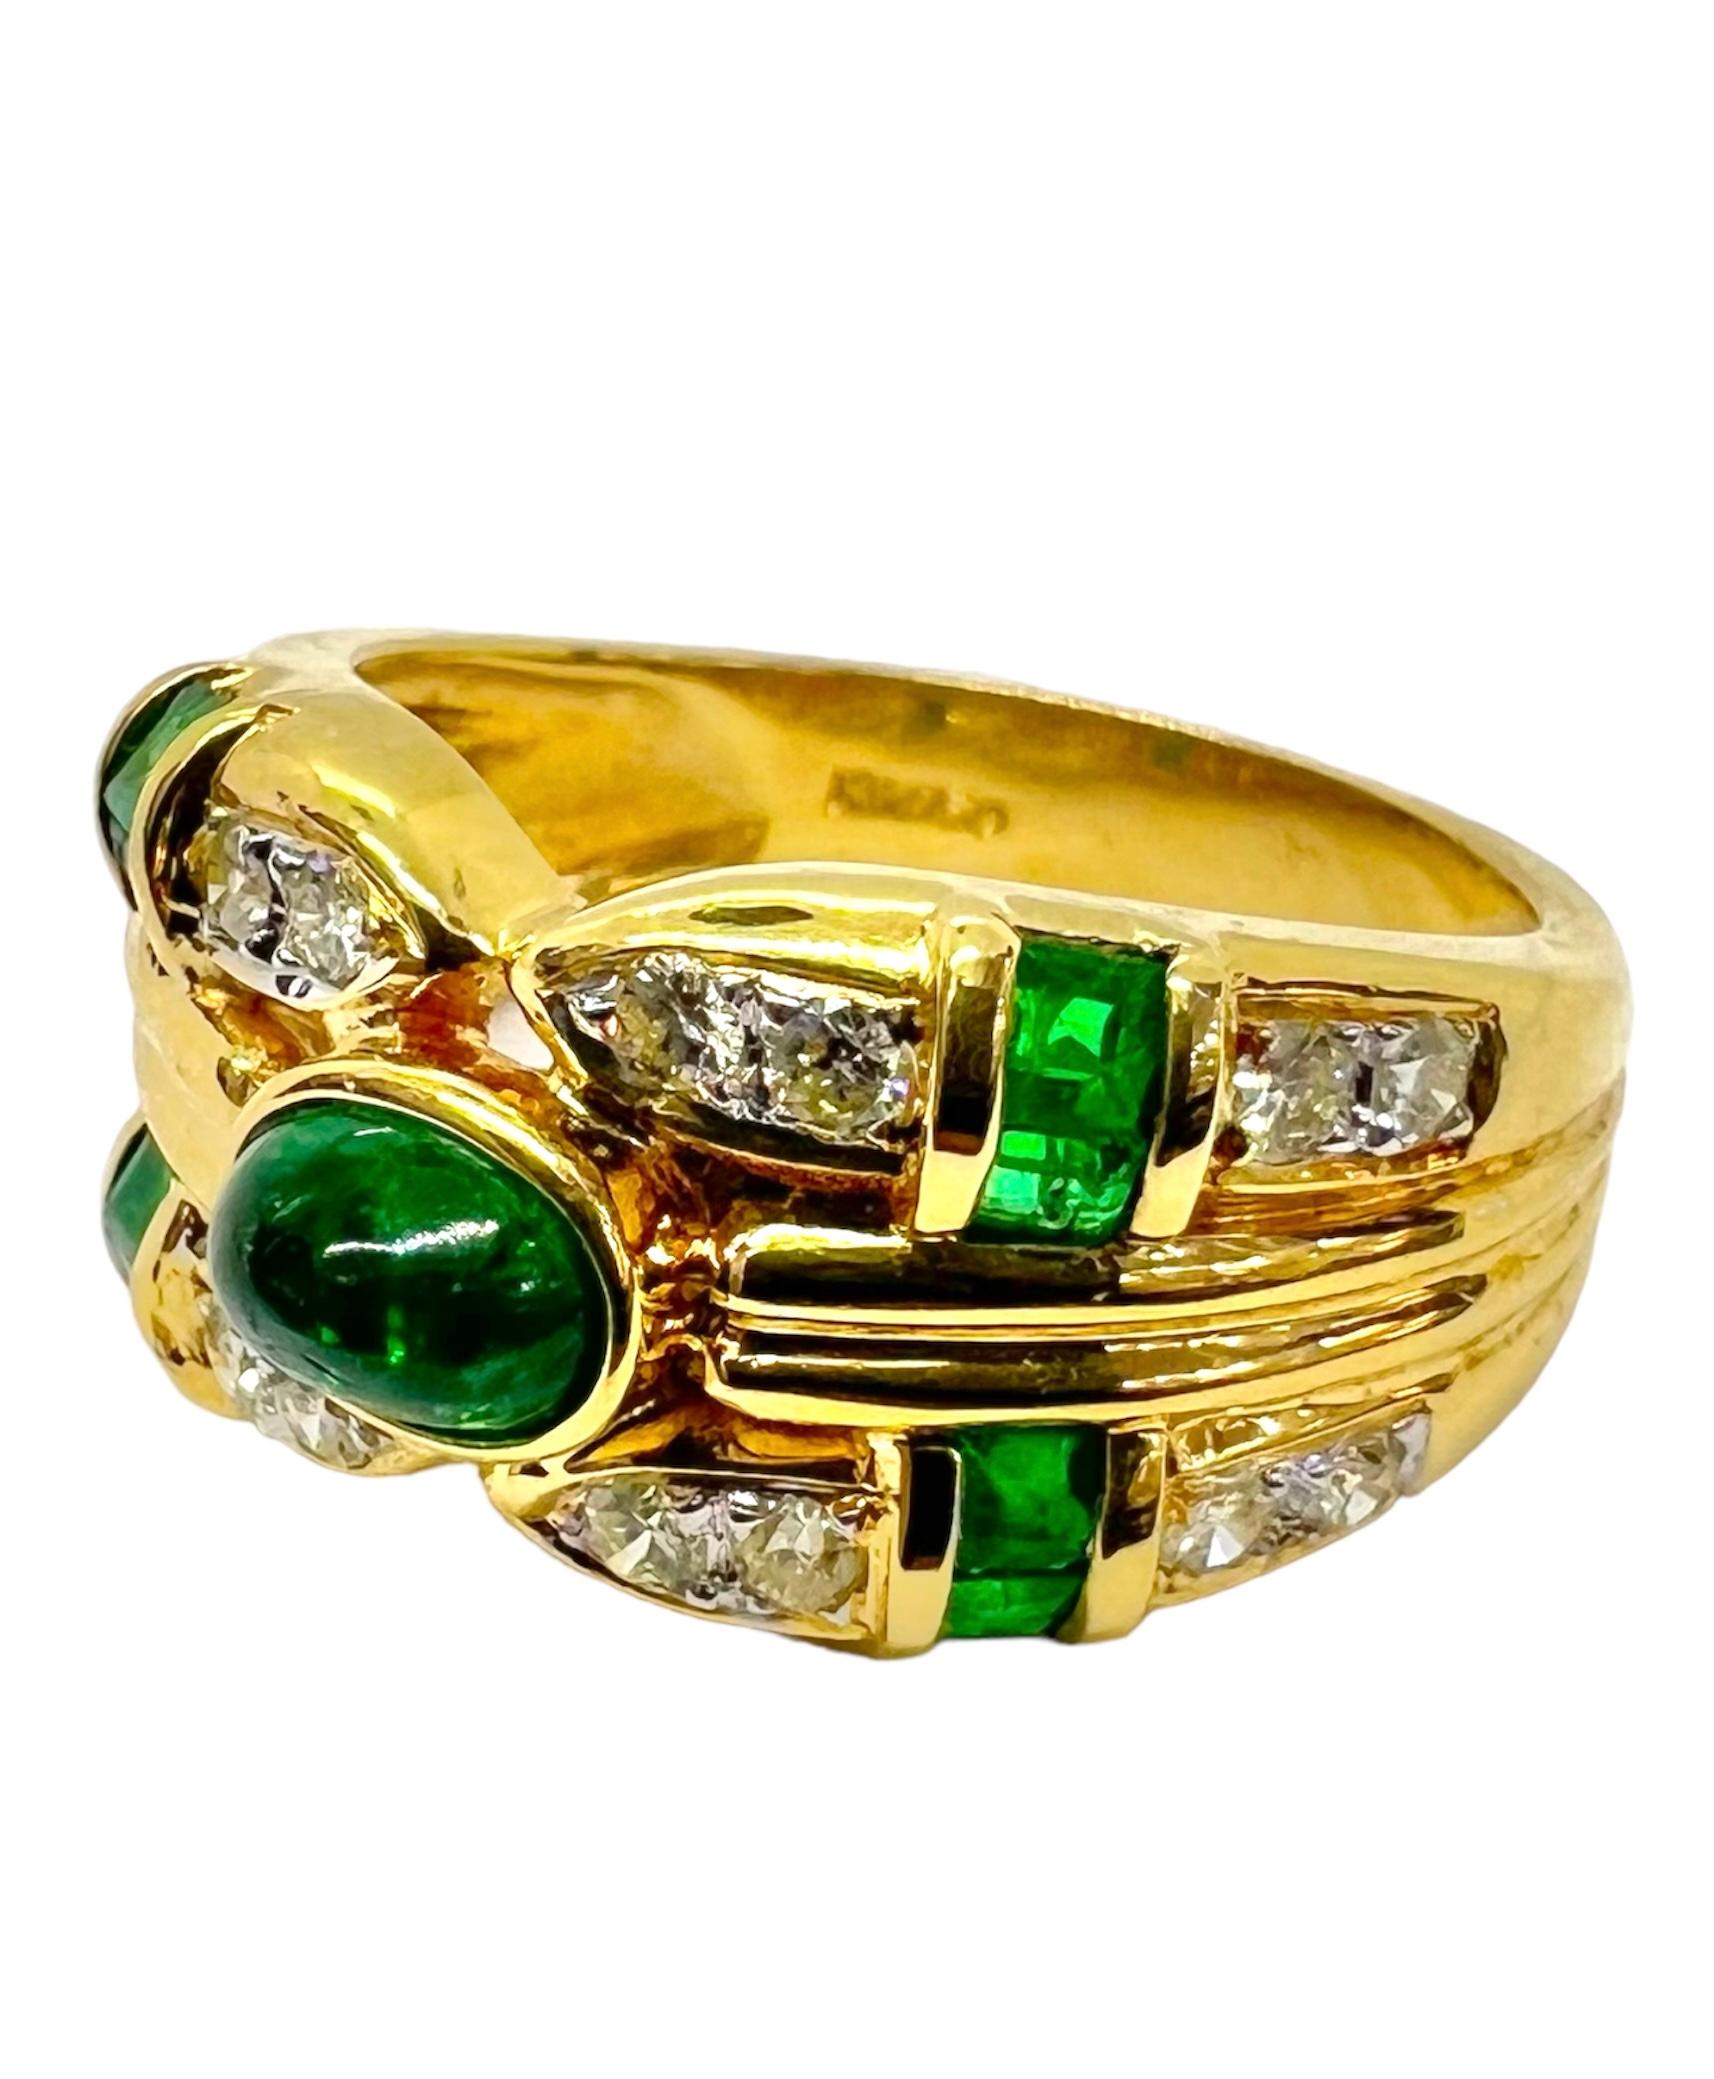 18K yellow gold cardinal ring with emerald center stone accentuated with diamonds and emeralds. 

Sophia D by Joseph Dardashti LTD has been known worldwide for 35 years and are inspired by classic Art Deco design that merges with modern